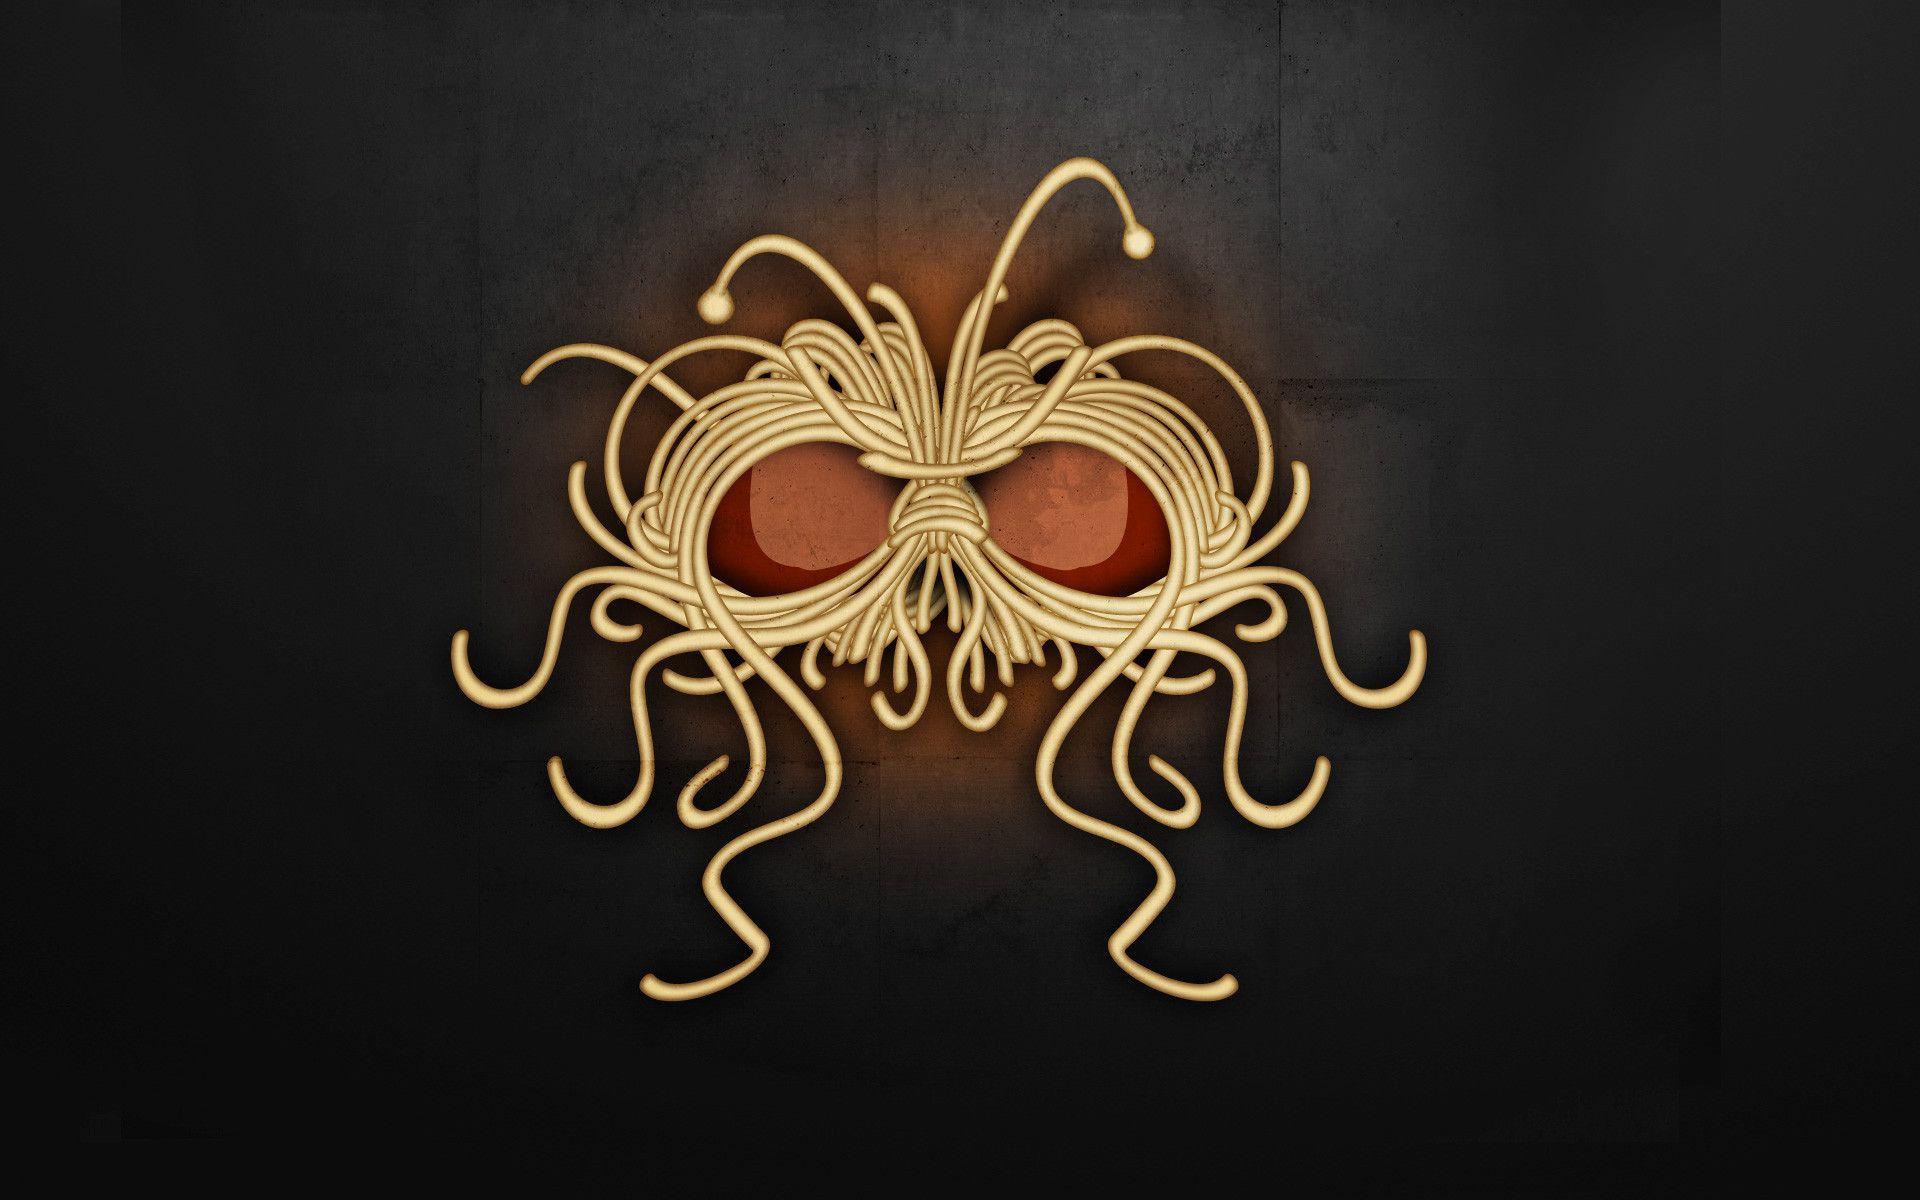 I&created Flying Spaghetti Monster wallpaper. Do with it what